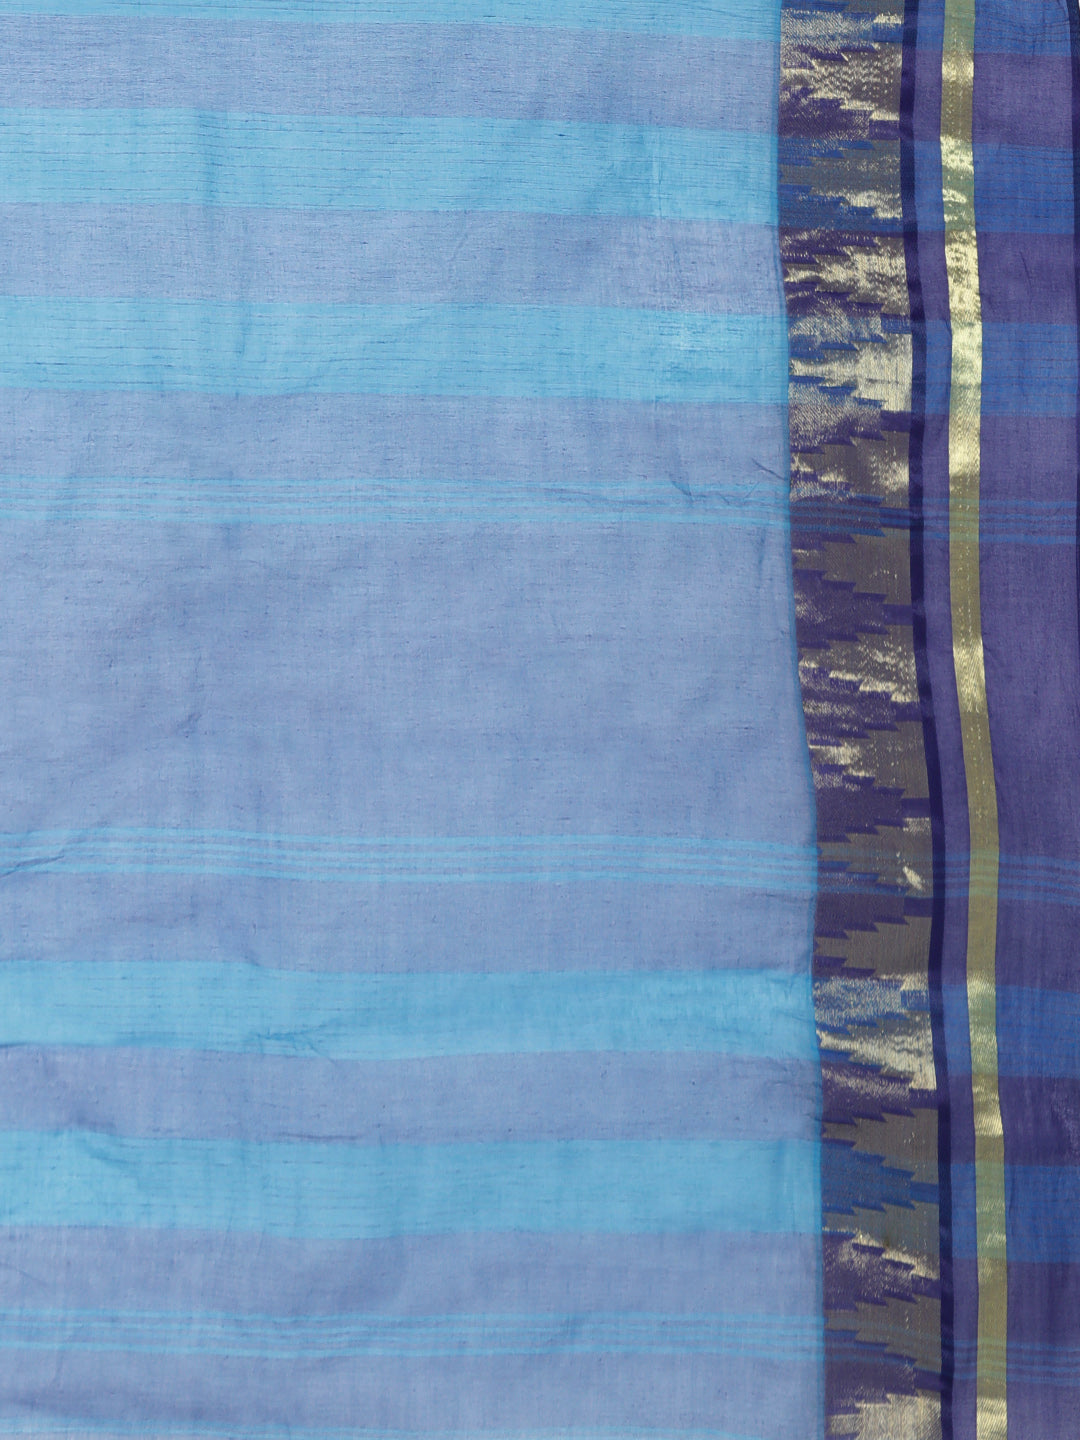 Blue Tant Woven Design Saree Without Blouse Piece DUTASA054 DUTASA054-Saree-Kalakari India-DUTASA054-Geographical Indication, Hand Crafted, Heritage Prints, Natural Dyes, Sarees, Silk Cotton, Sustainable Fabrics, Taant, Tant, West Bengal, Woven-[Linen,Ethnic,wear,Fashionista,Handloom,Handicraft,Indigo,blockprint,block,print,Cotton,Chanderi,Blue, latest,classy,party,bollywood,trendy,summer,style,traditional,formal,elegant,unique,style,hand,block,print, dabu,booti,gift,present,glamorous,affordable